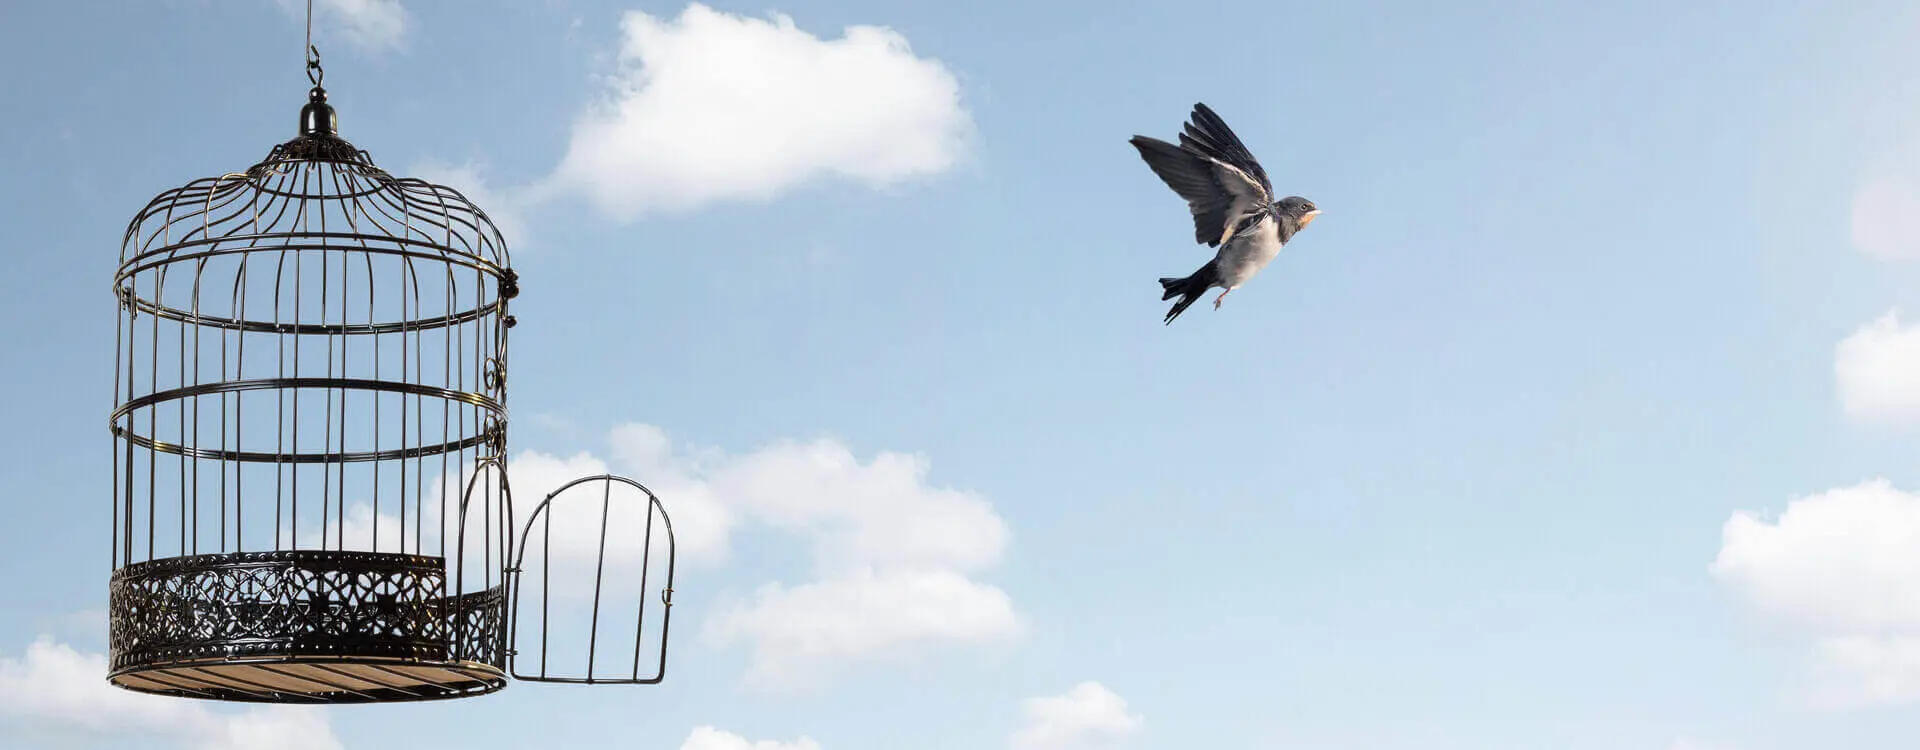 Open bird cage on the left, flying free bird on the right. Cloudy sky is the background of the photo.